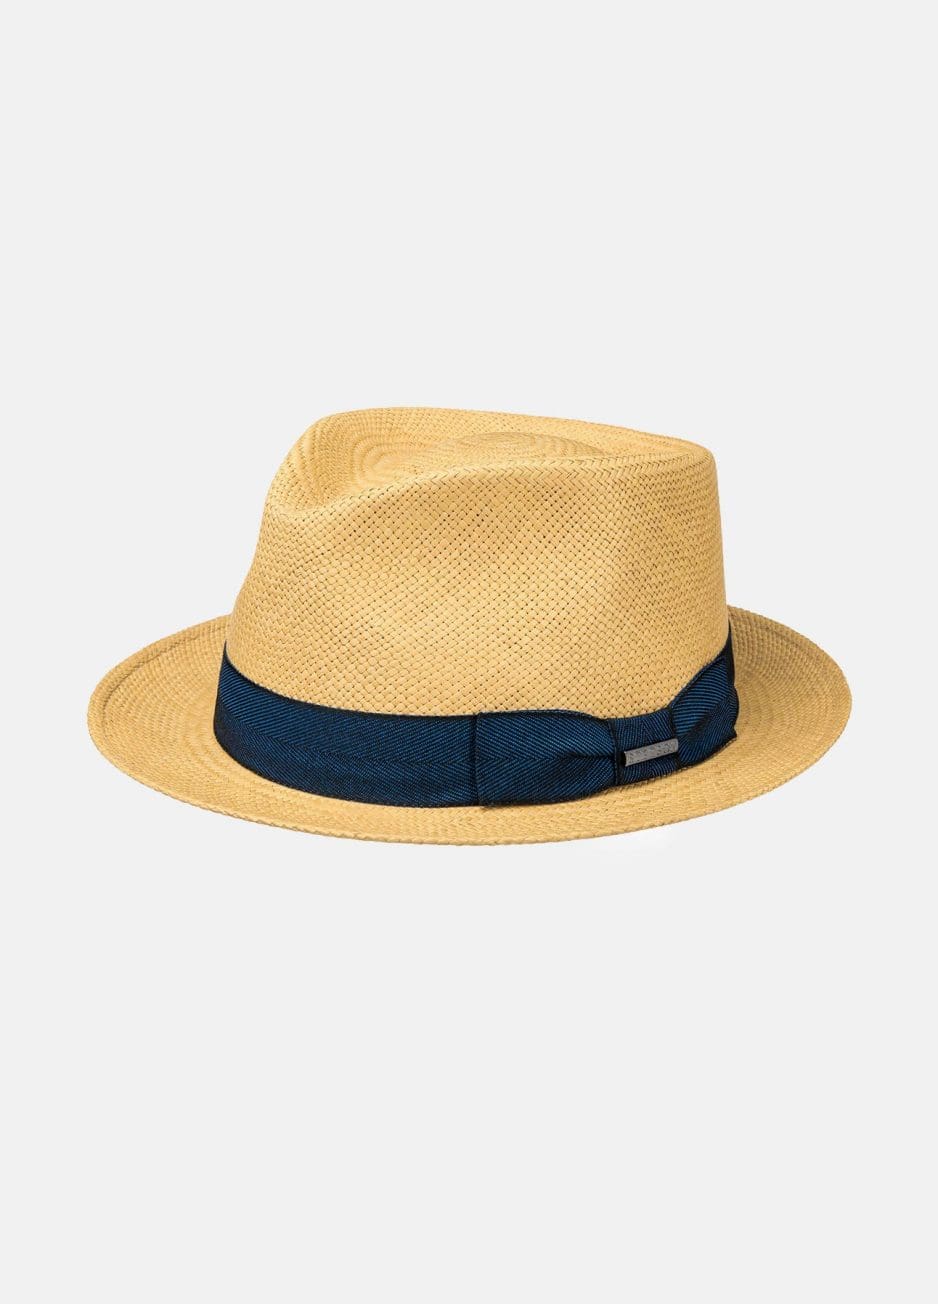 player panama hat fra stetson ss21